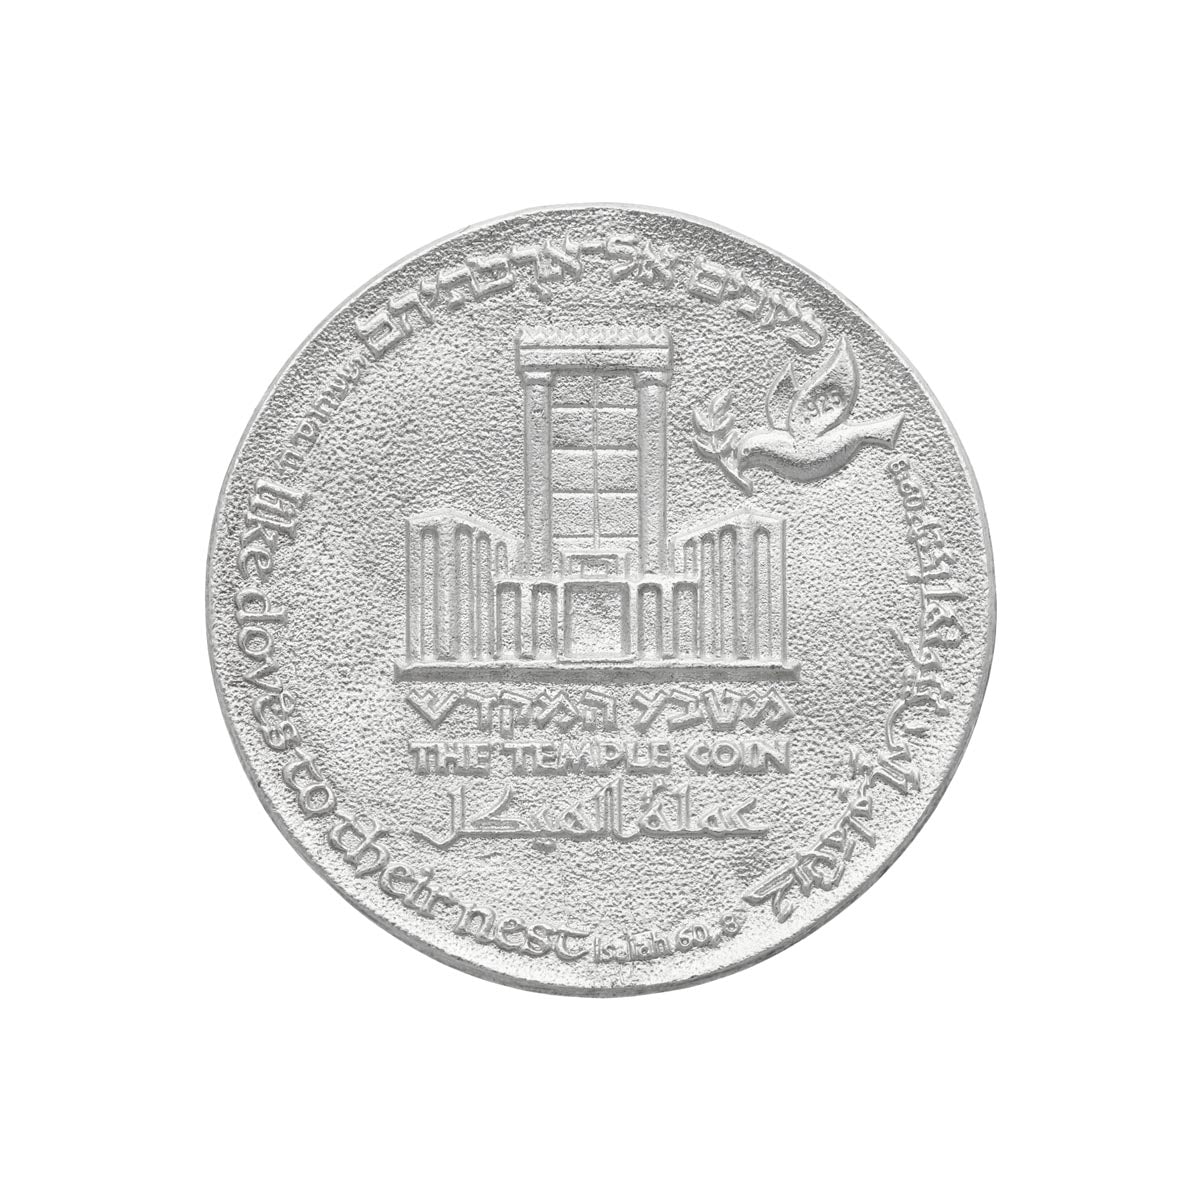 70 year coin solid silver - back (4182728933466)